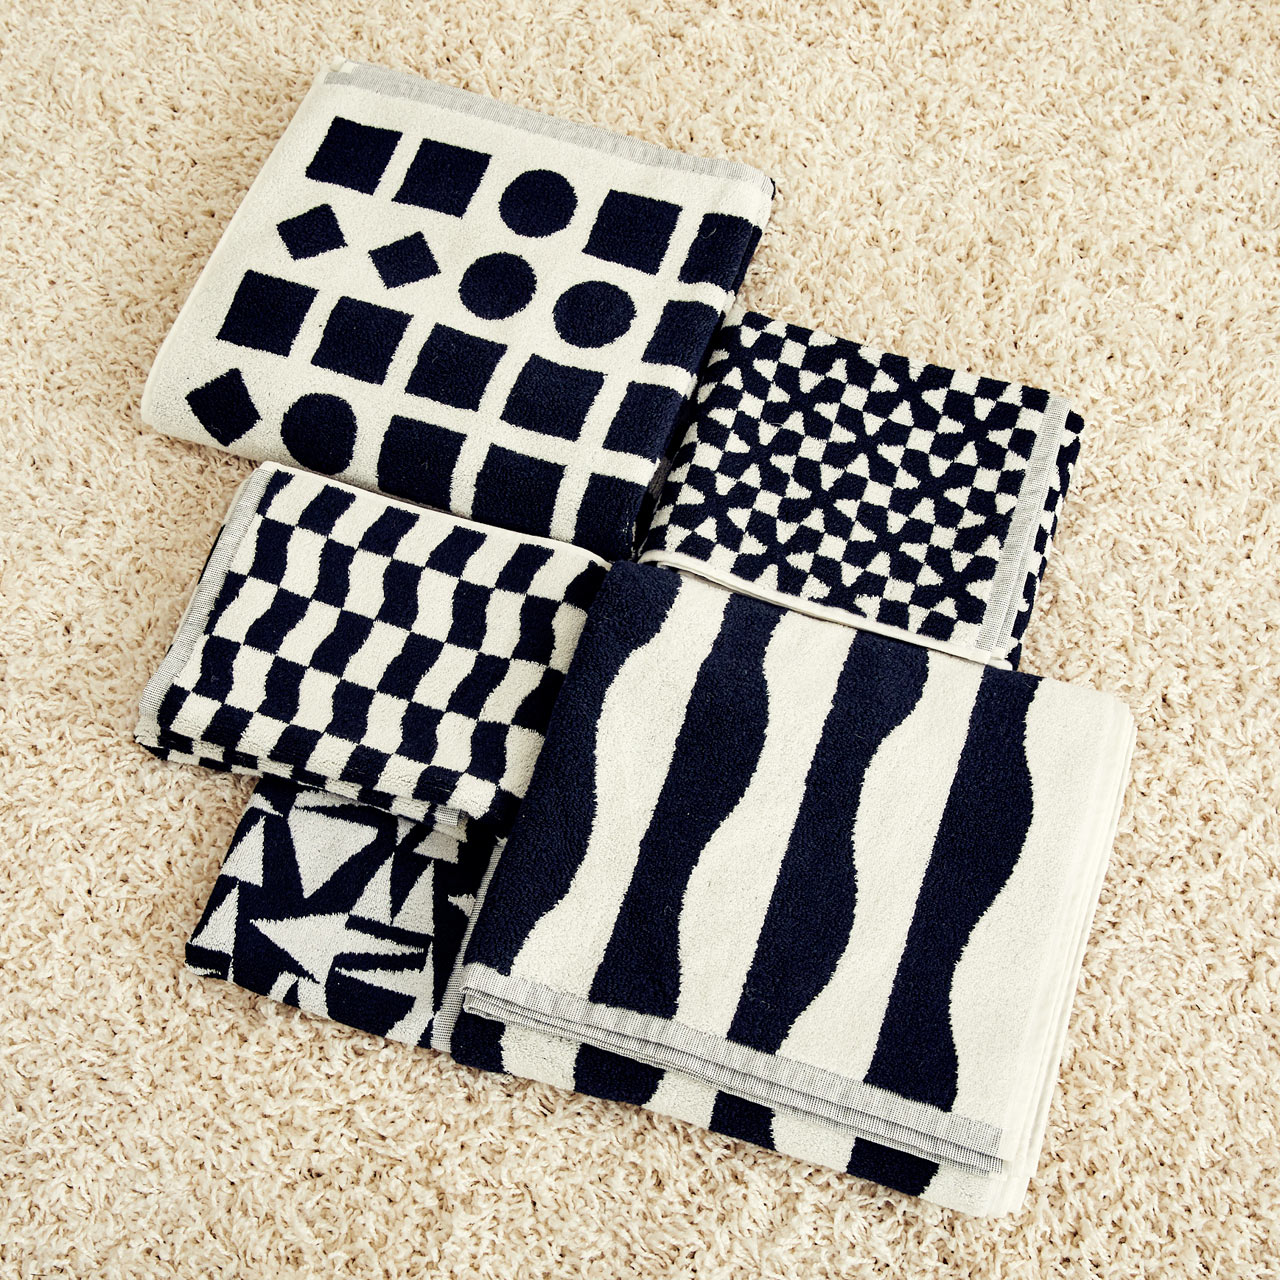 Dusen Dusen Introduces Their Black and White Towel Collection